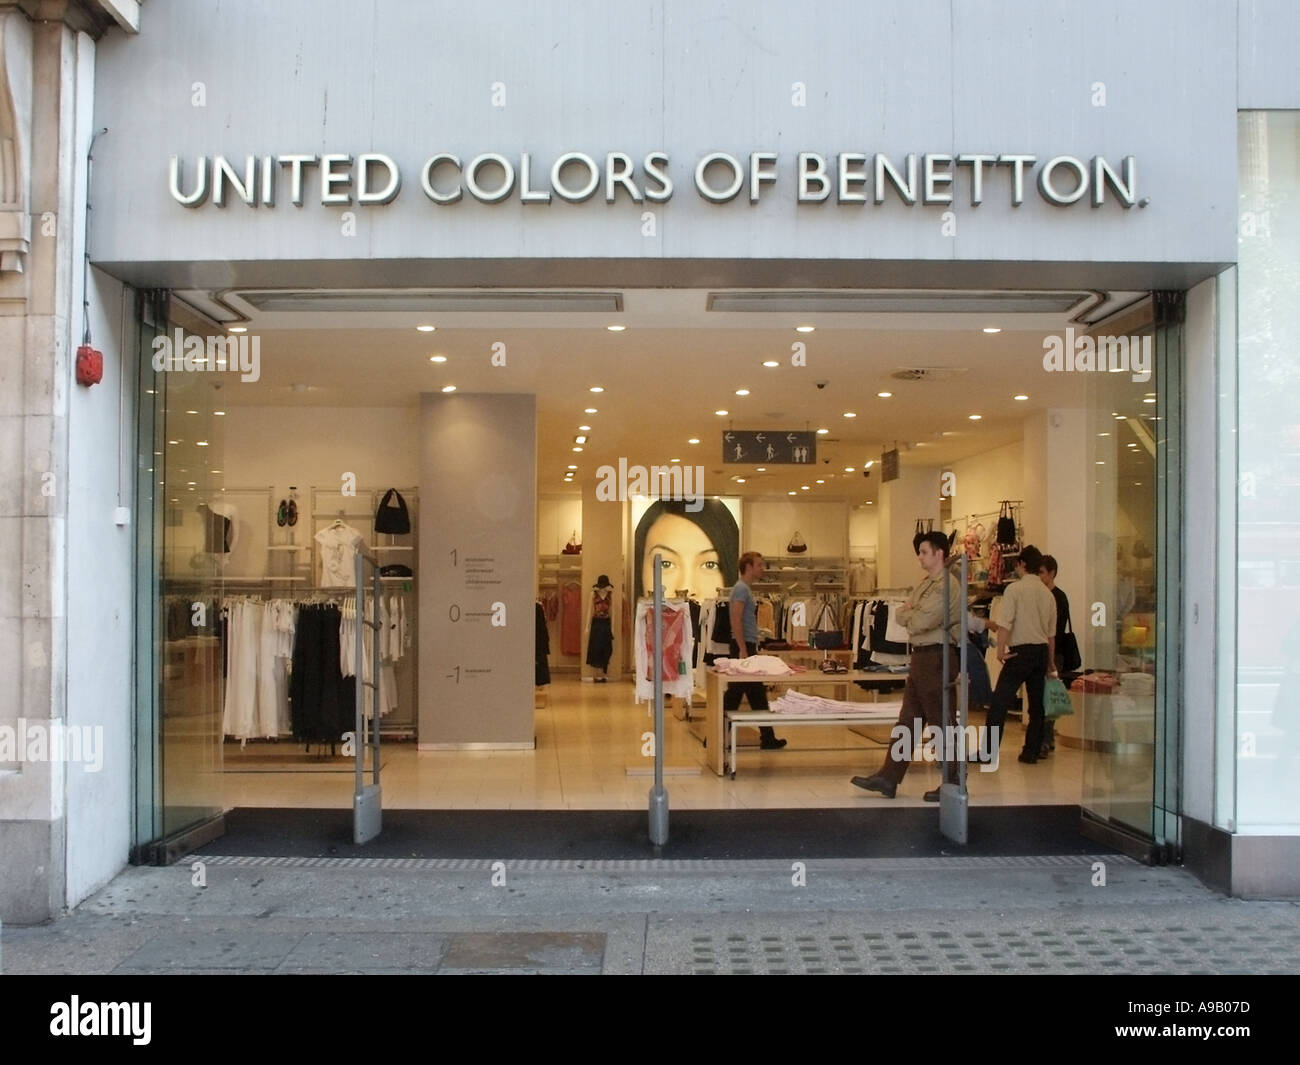 Page 2 - Benetton Shop High Resolution Stock Photography and Images - Alamy